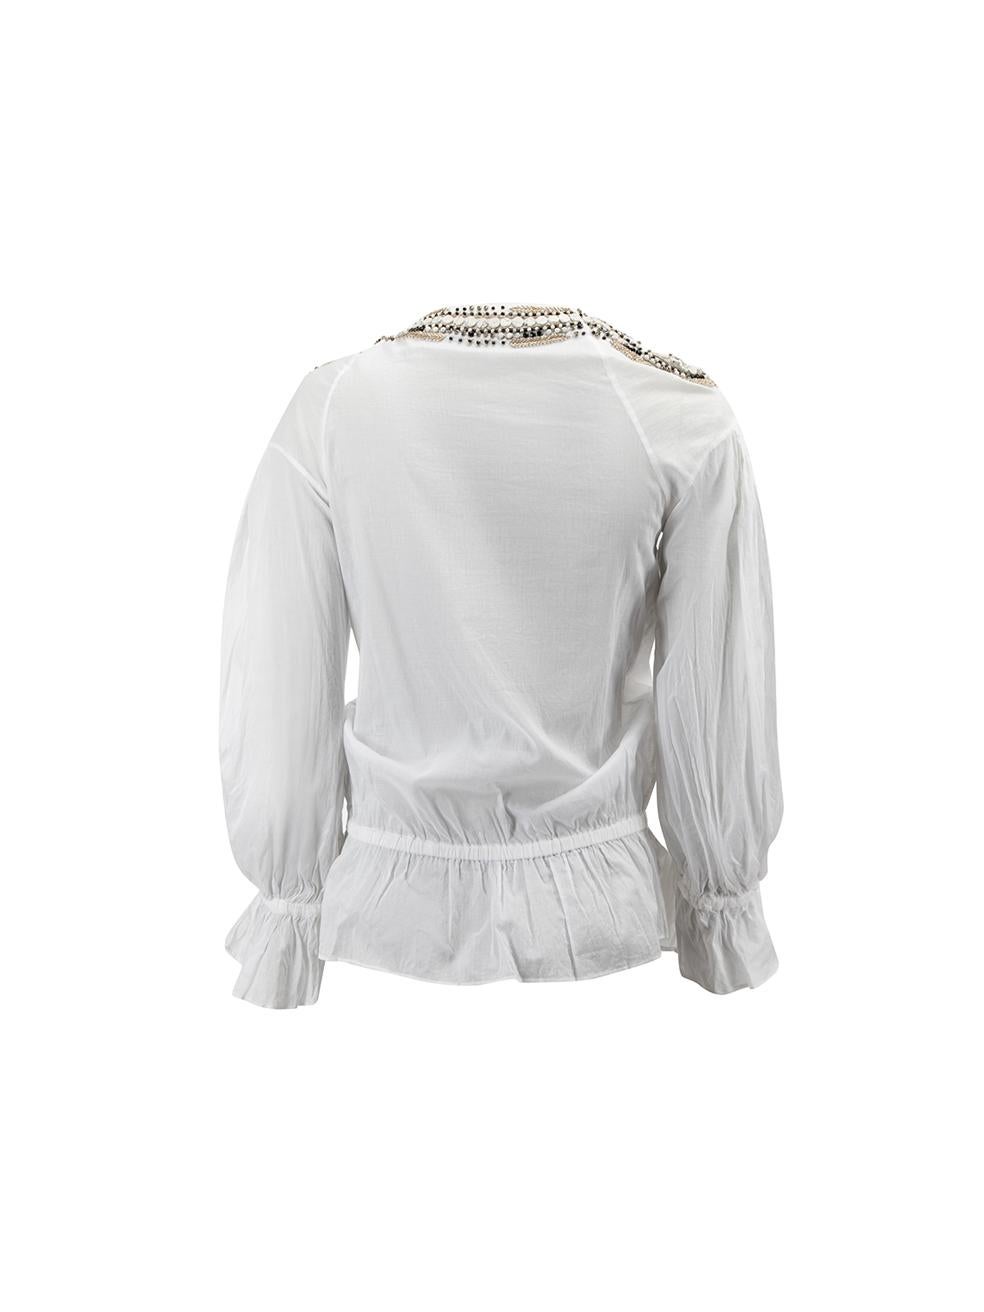 Roberto Cavalli White Embellished Tie Neck Top Size S In Good Condition For Sale In London, GB